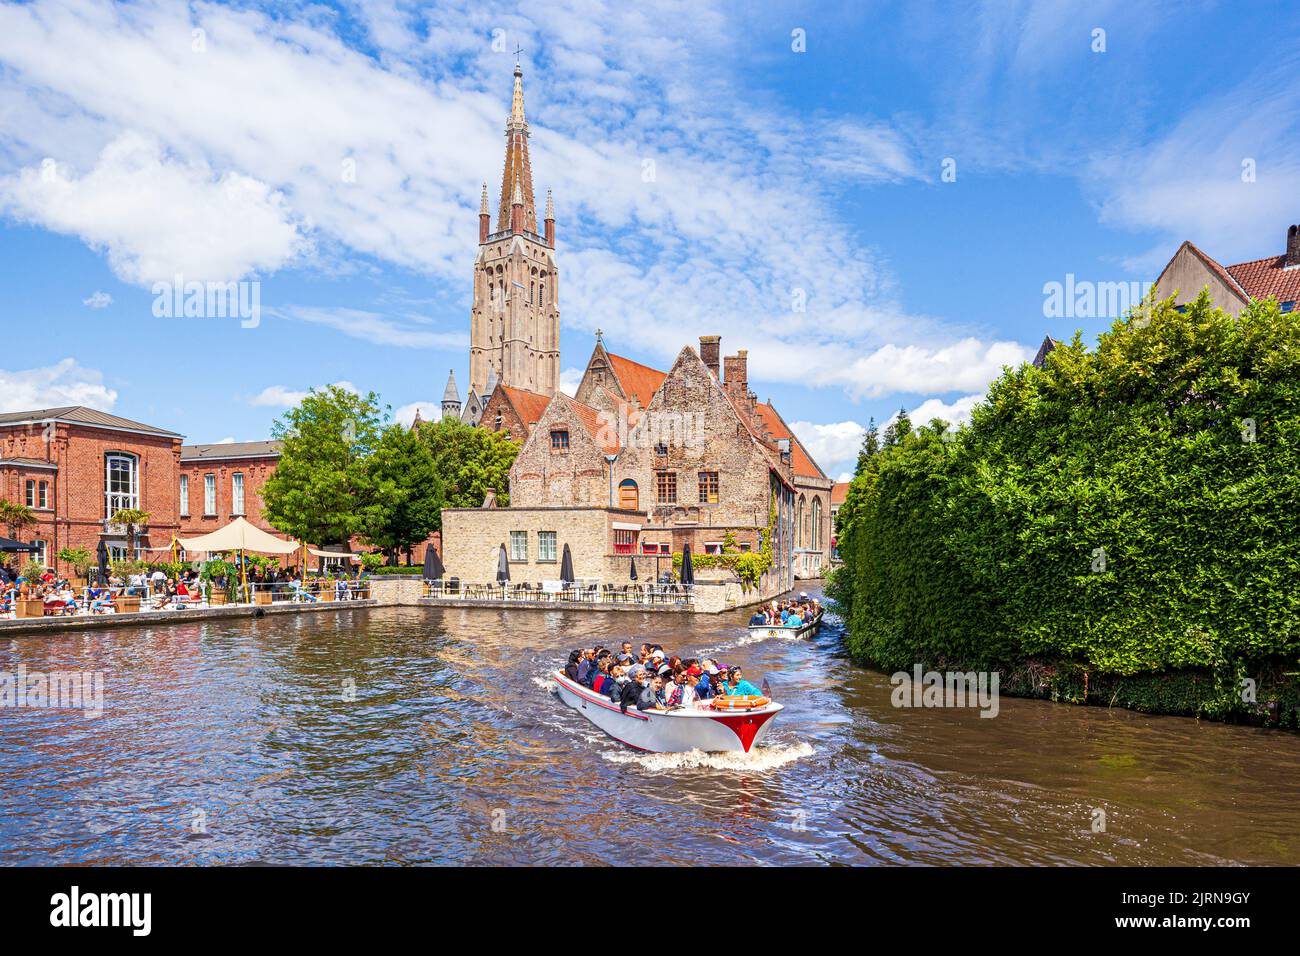 The spire of the Church of Our Lady (Onze-Lieve-Vrouwekerk) overlooking St Johns Hospital (Sint-Janshospitaal) and tourists enjoying a boat trip on th Stock Photo